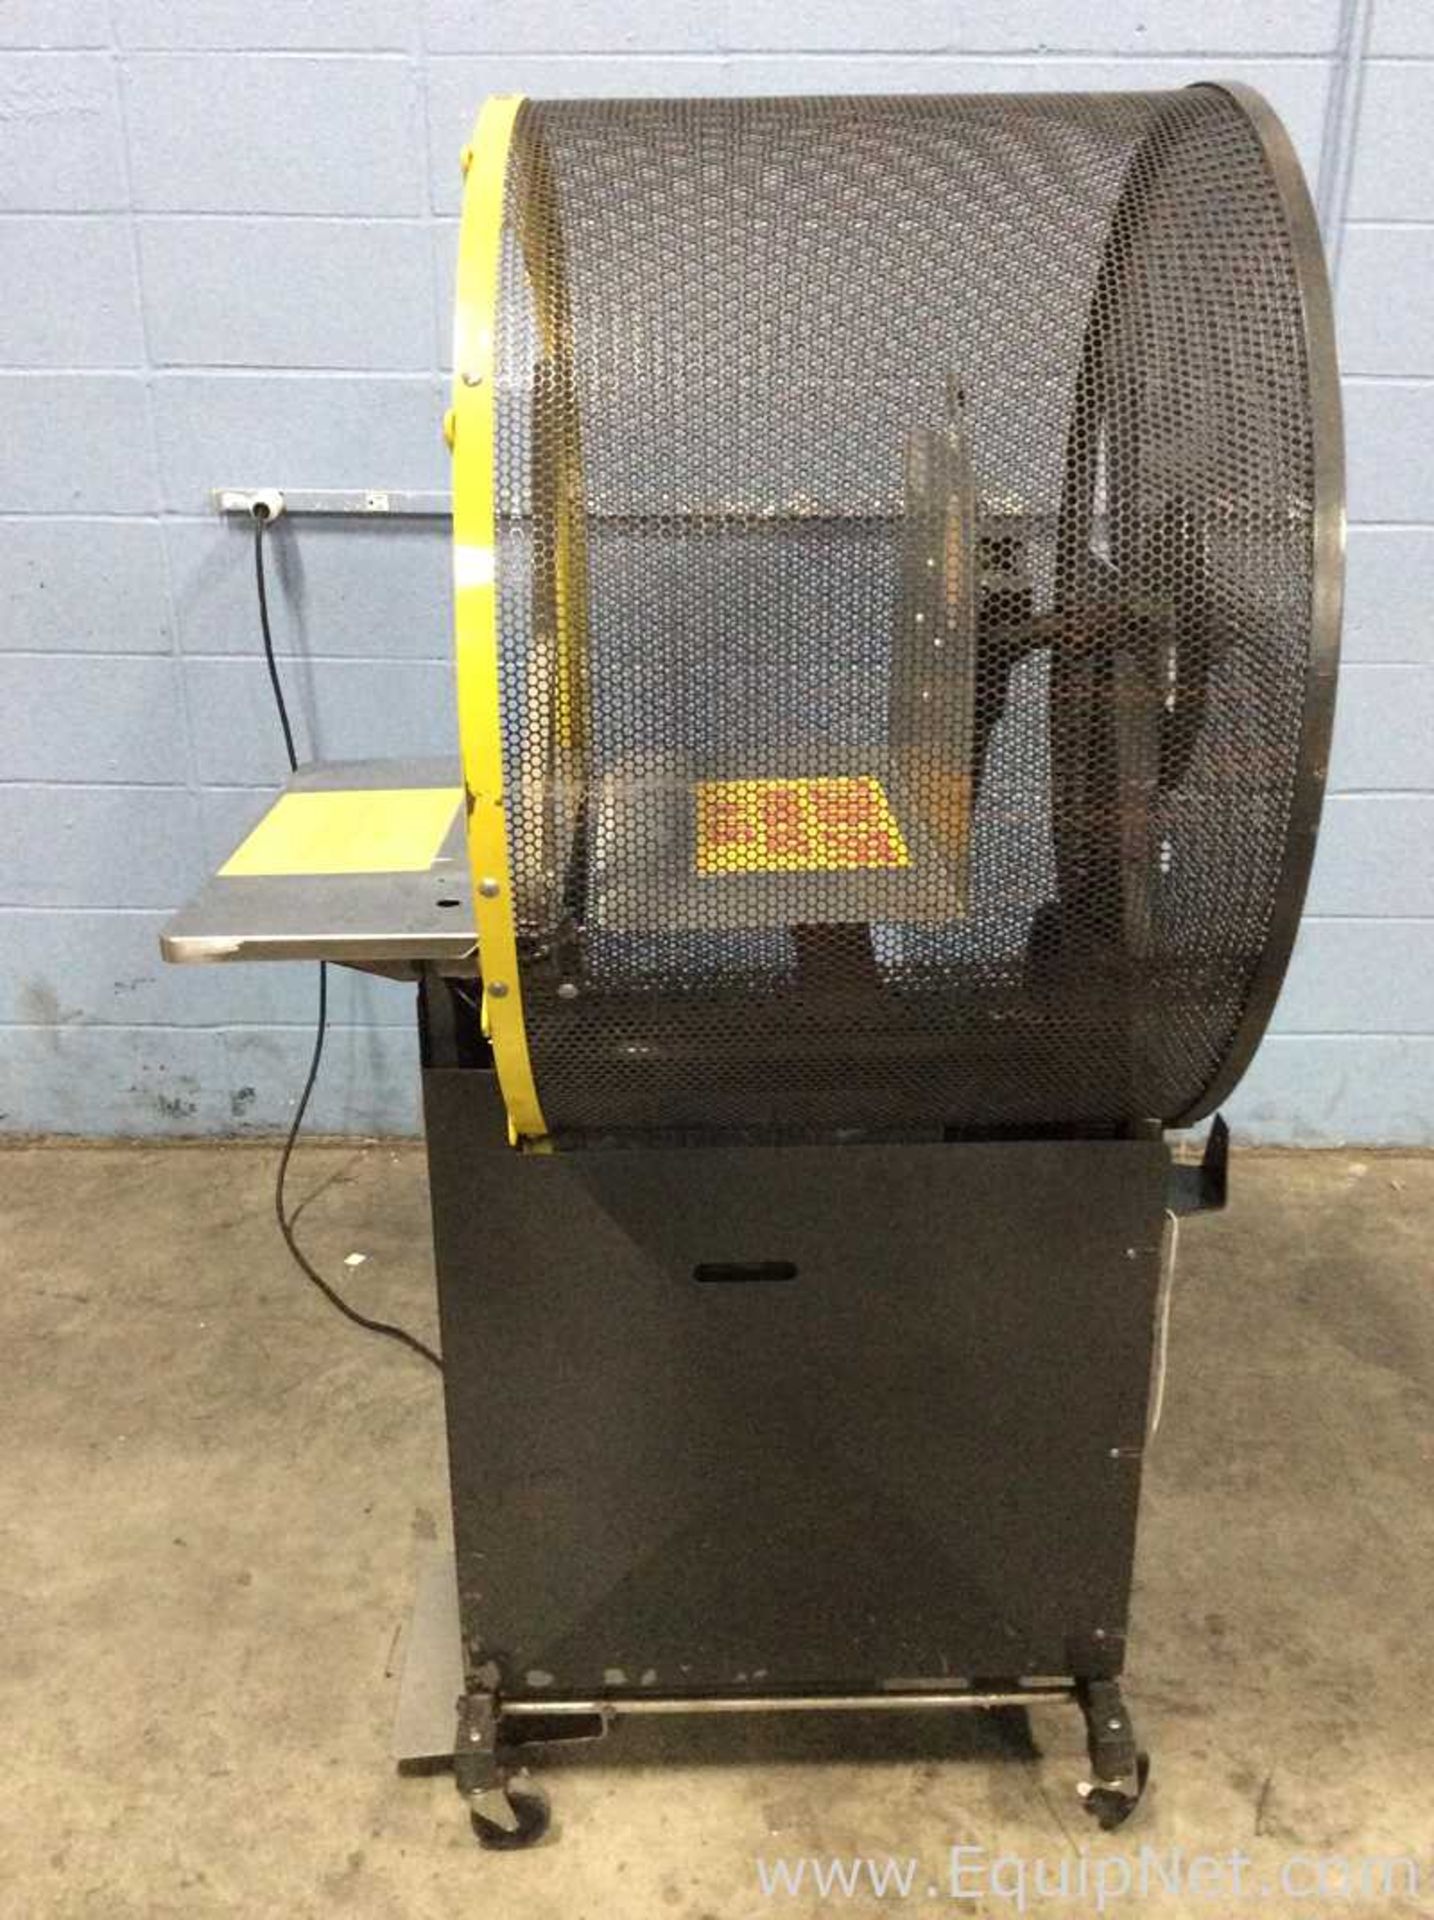 EQUIPNET LISTING #826409; REMOVAL COST: $20; MODEL: BT18; DESCRIPTION: Bunn BT18 Tying MachinePowers - Image 2 of 6